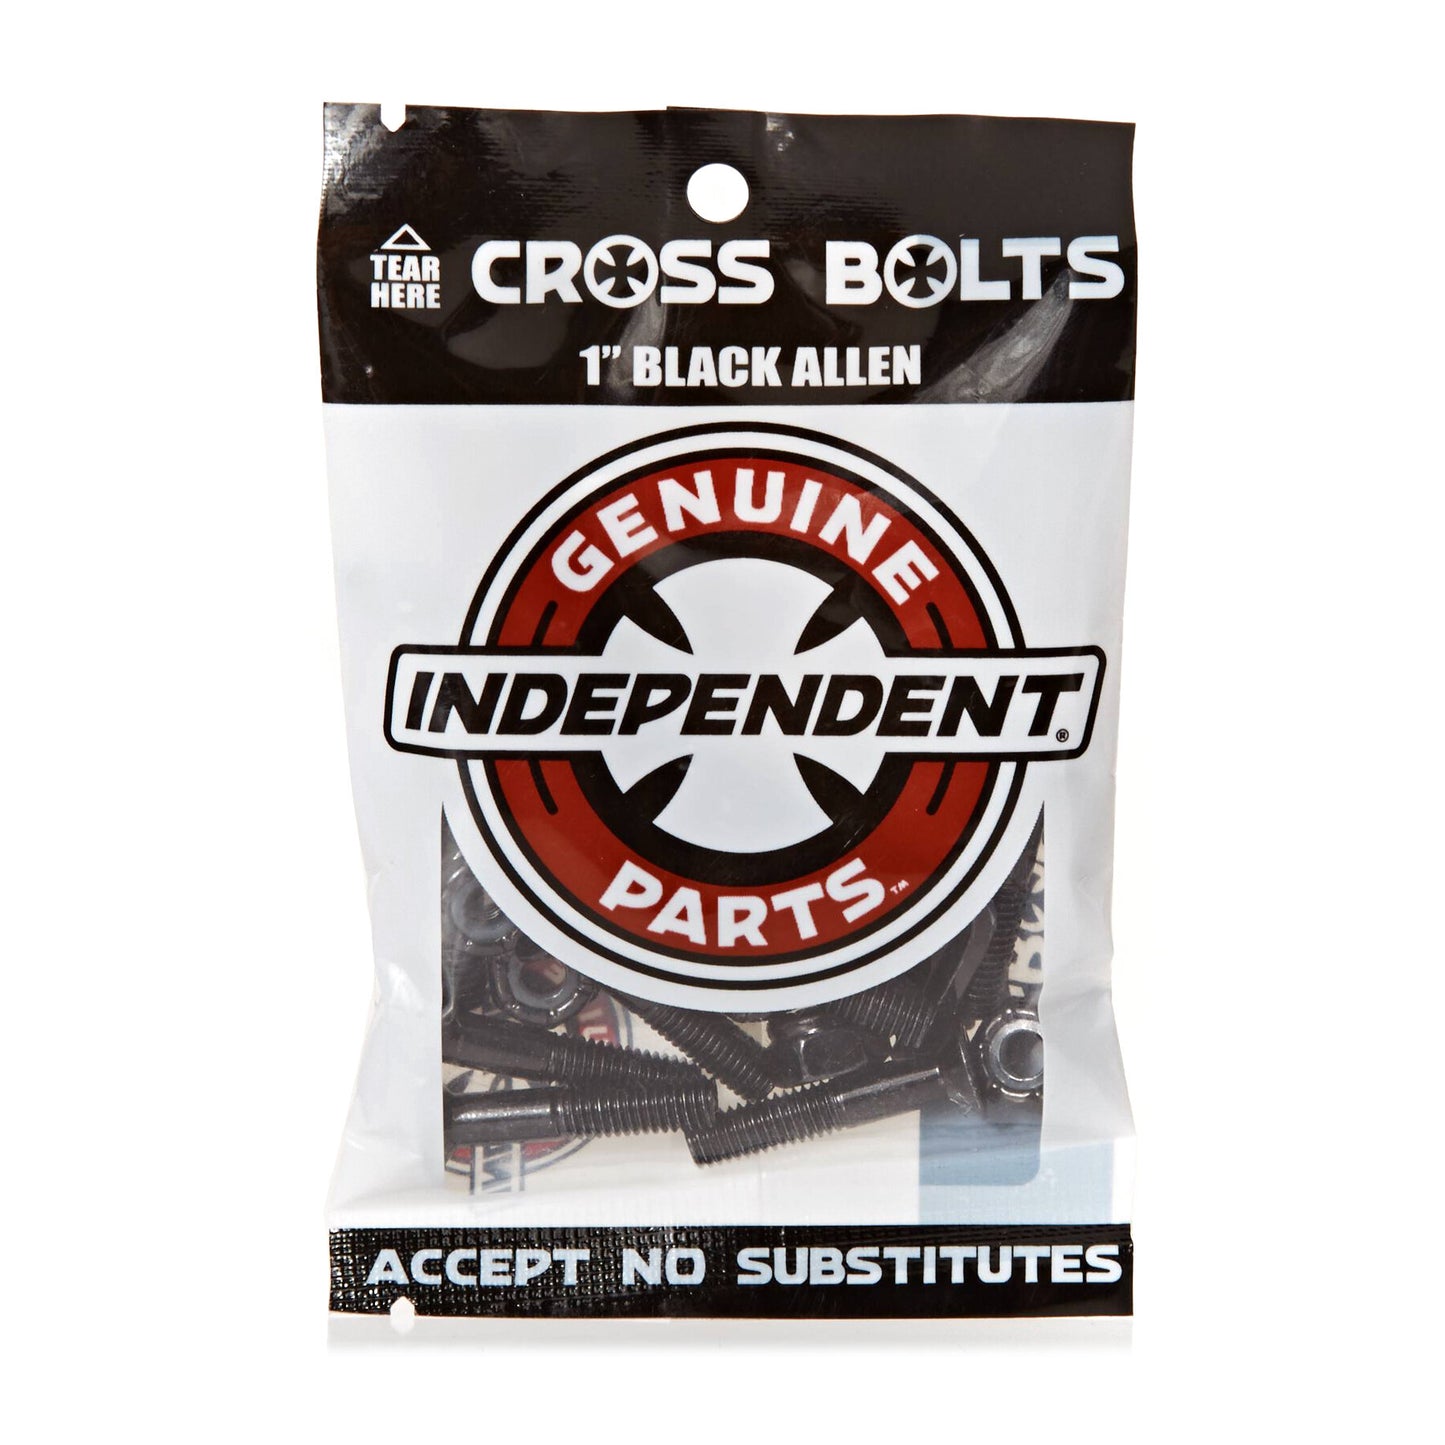 Independent - Phillips Bolts - 1"